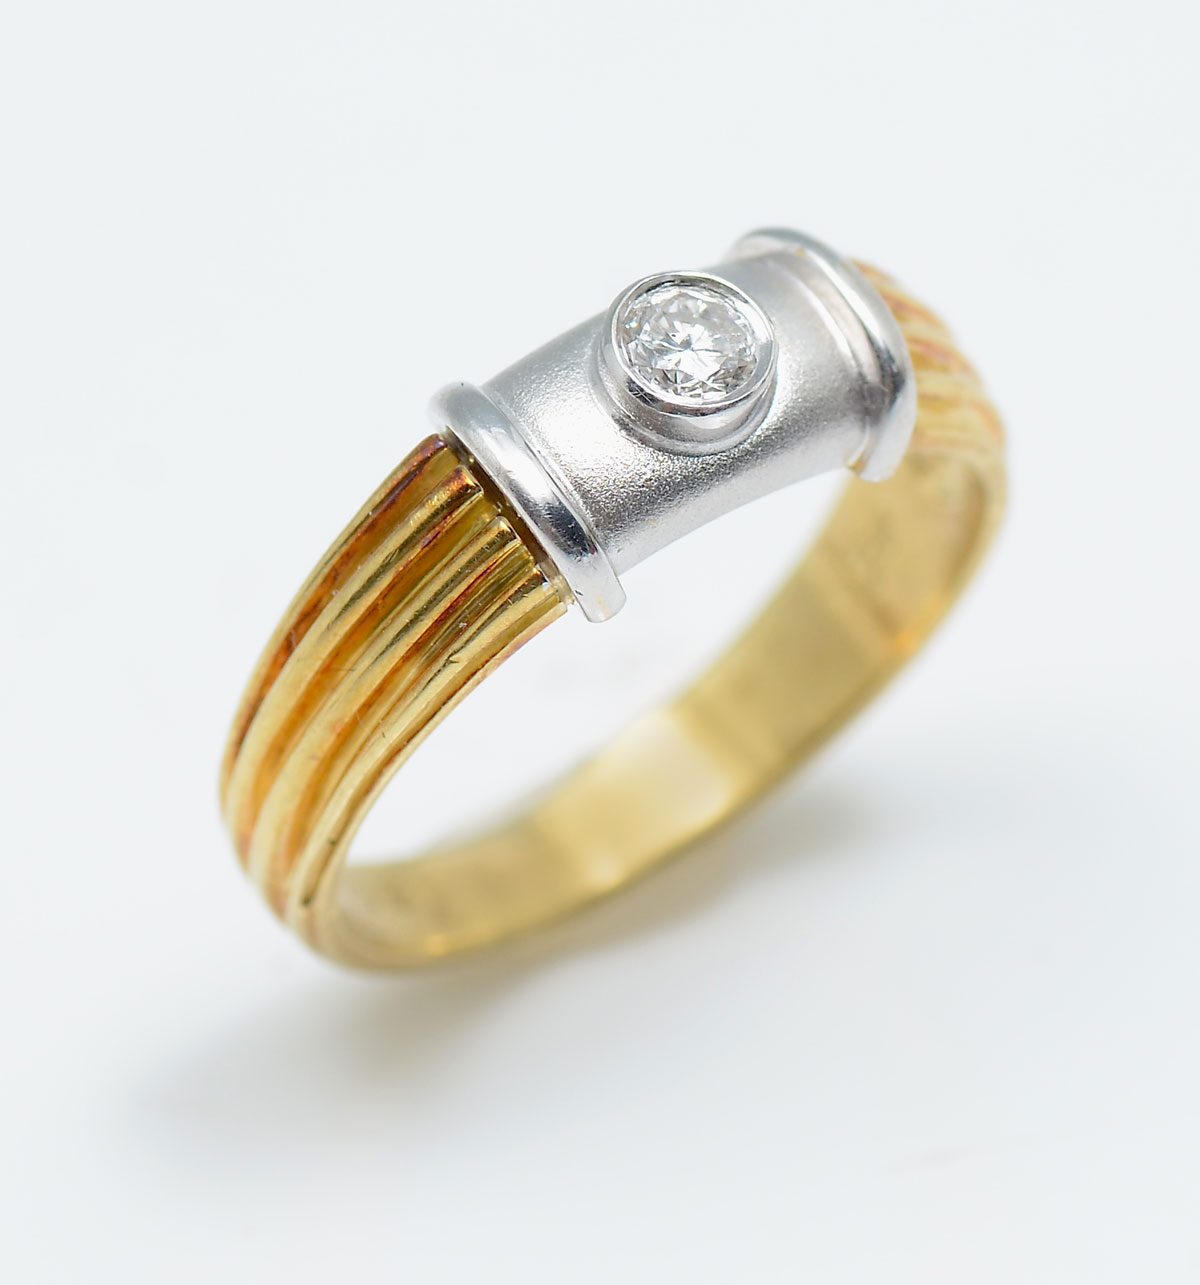 2 TONE 18K FLUTED RING WITH BEZEL 27449c